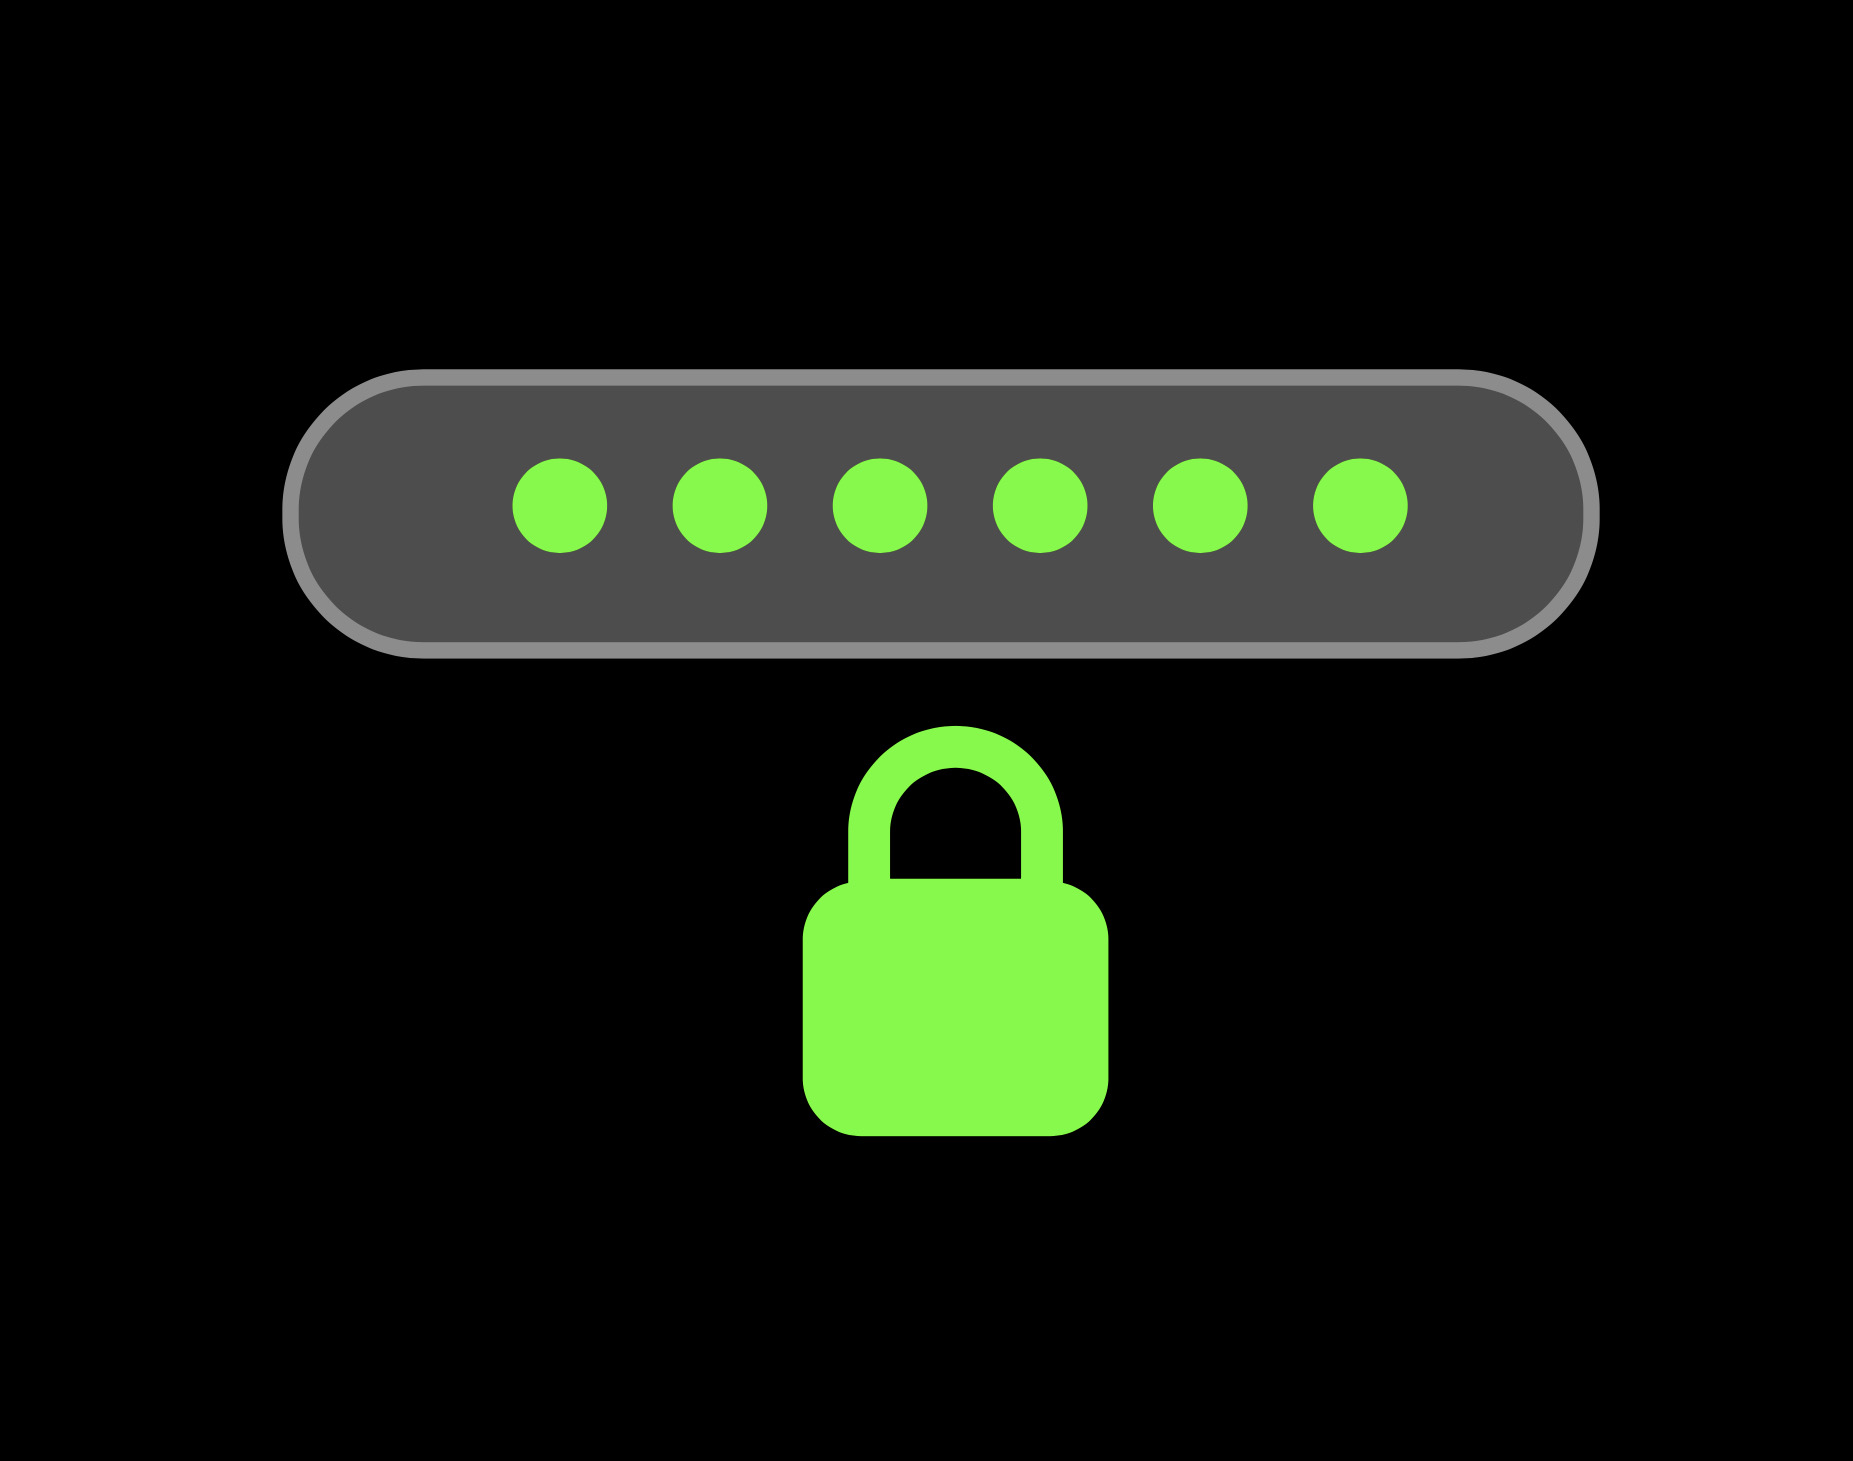 Illustration of a Password Entry Field